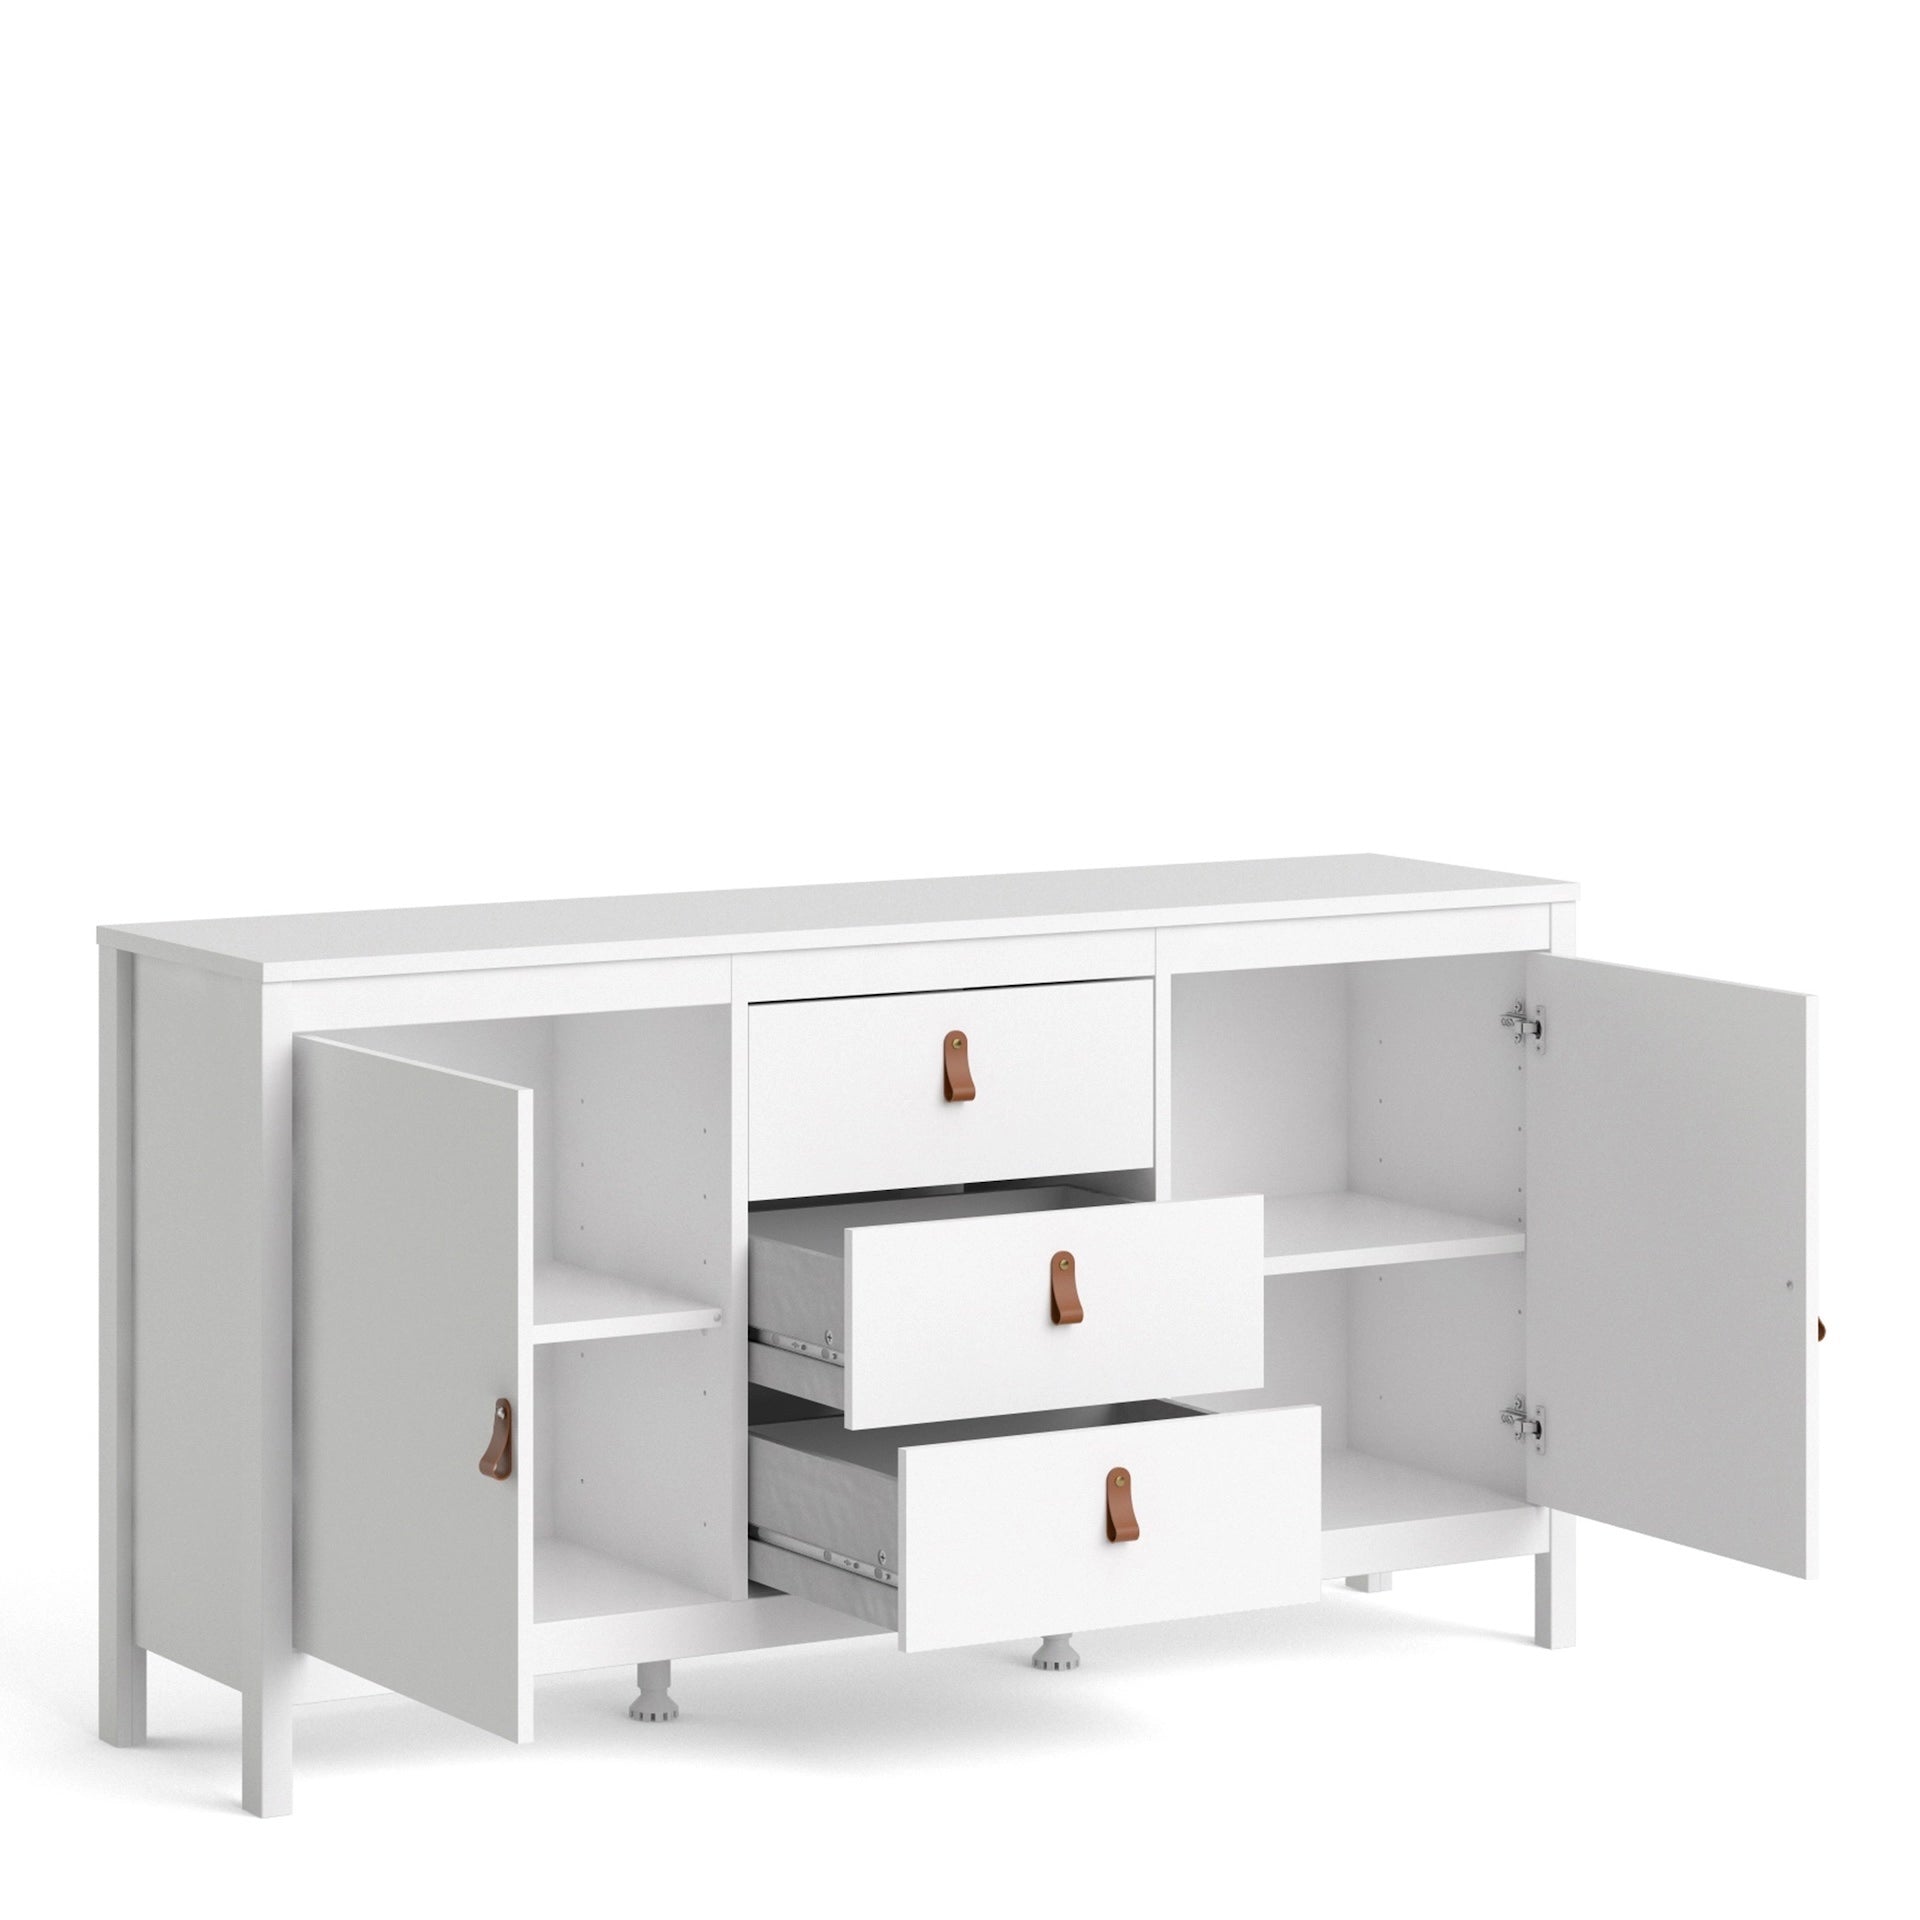 Furniture To Go Barcelona Sideboard 2 Doors + 3 Drawers in White